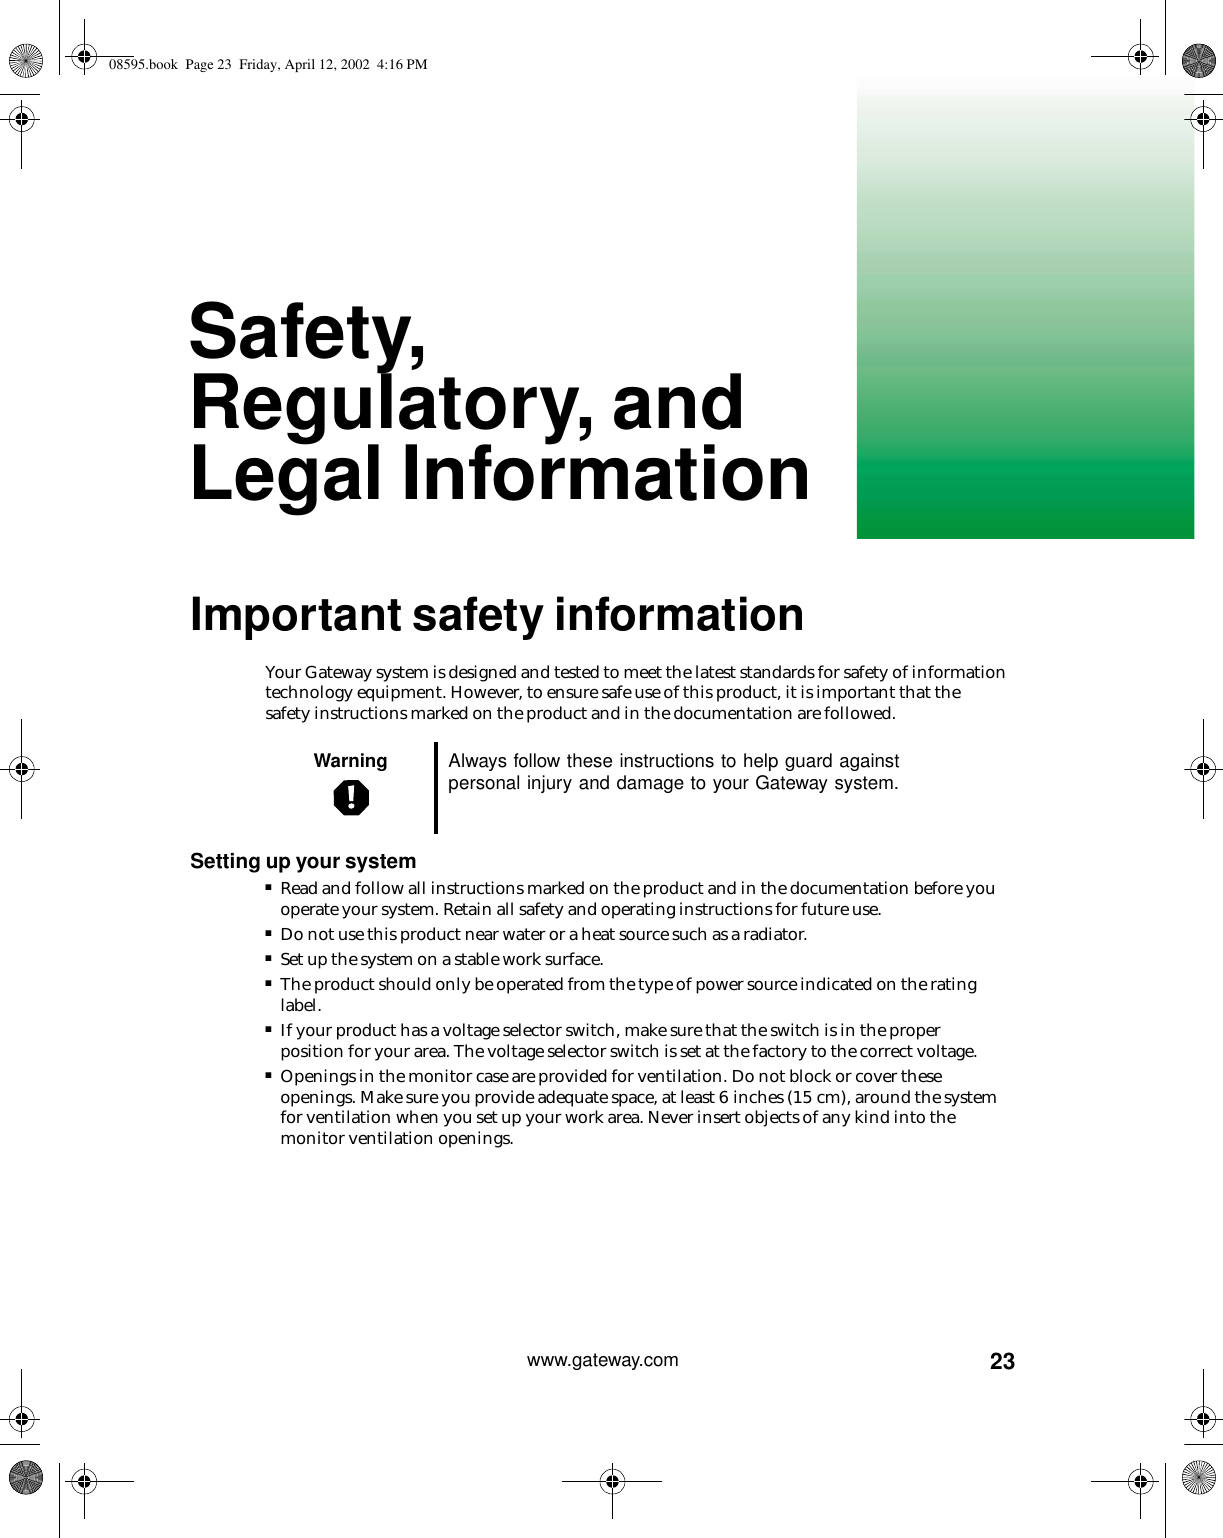 23www.gateway.comSafety, Regulatory, and Legal InformationImportant safety informationYour Gateway system is designed and tested to meet the latest standards for safety of information technology equipment. However, to ensure safe use of this product, it is important that the safety instructions marked on the product and in the documentation are followed.Setting up your system■Read and follow all instructions marked on the product and in the documentation before you operate your system. Retain all safety and operating instructions for future use.■Do not use this product near water or a heat source such as a radiator.■Set up the system on a stable work surface.■The product should only be operated from the type of power source indicated on the rating label.■If your product has a voltage selector switch, make sure that the switch is in the proper position for your area. The voltage selector switch is set at the factory to the correct voltage.■Openings in the monitor case are provided for ventilation. Do not block or cover these openings. Make sure you provide adequate space, at least 6 inches (15 cm), around the system for ventilation when you set up your work area. Never insert objects of any kind into the monitor ventilation openings.Warning Always follow these instructions to help guard against personal injury and damage to your Gateway system.08595.book  Page 23  Friday, April 12, 2002  4:16 PM